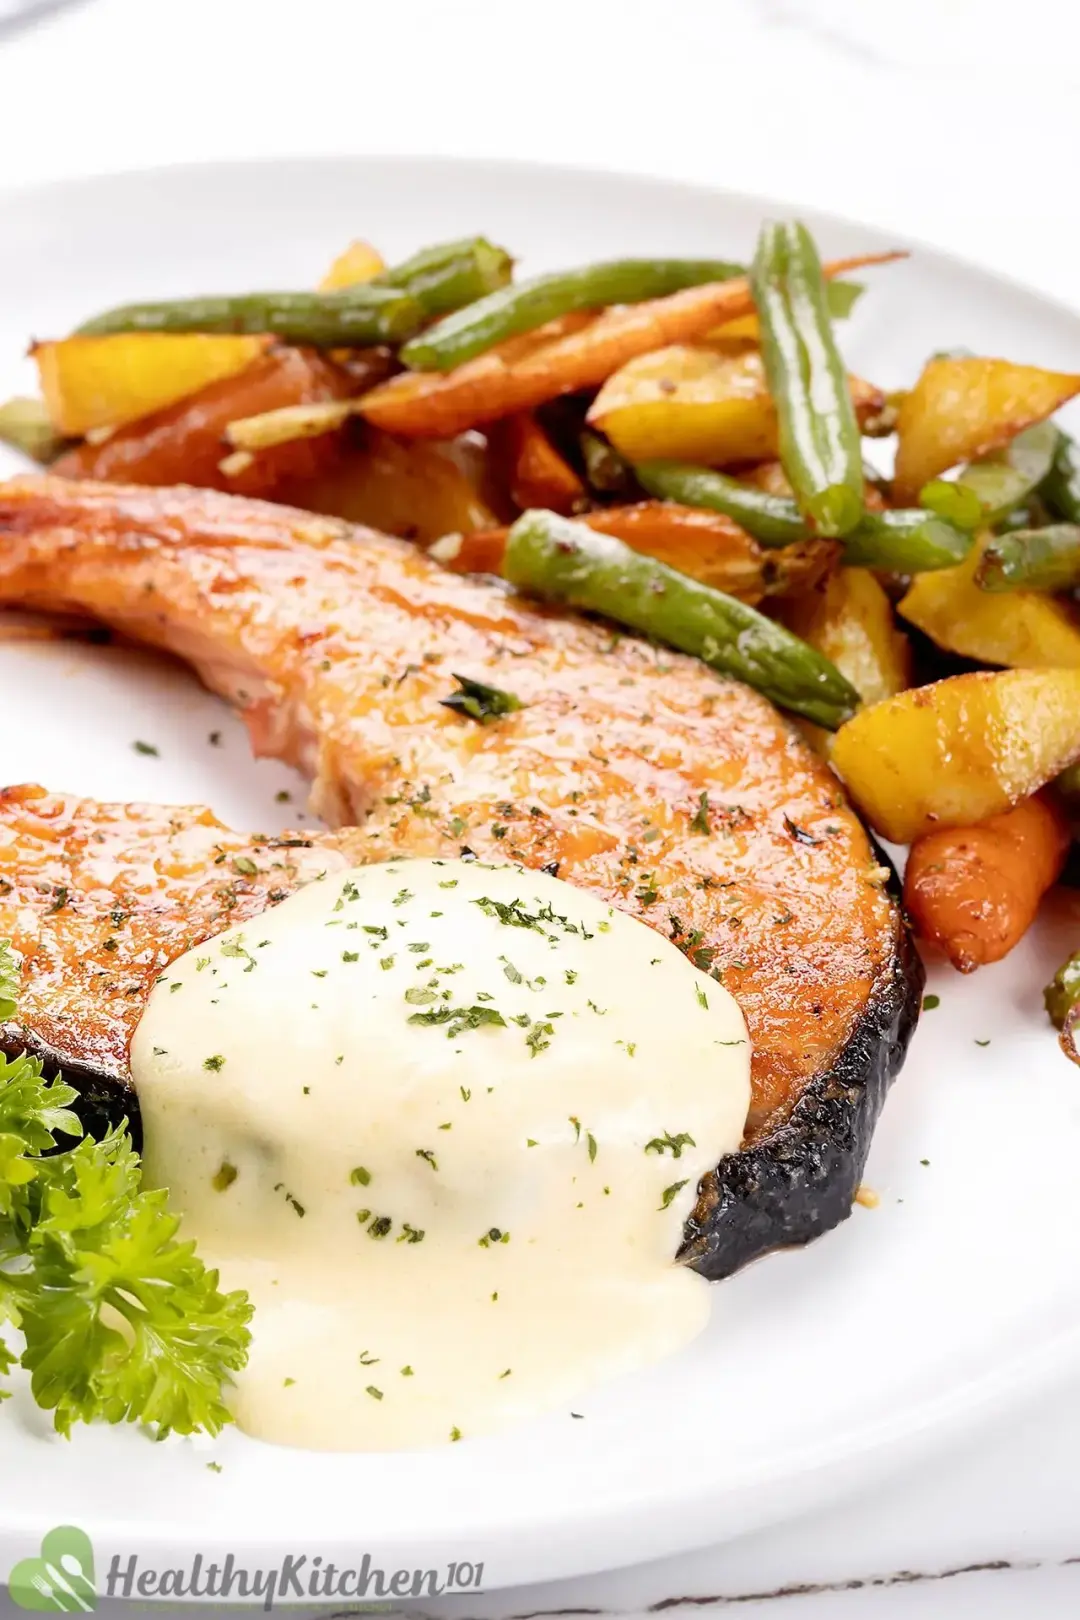 A glossy salmon steak dolloped with cream and served with roasted baby vegetables